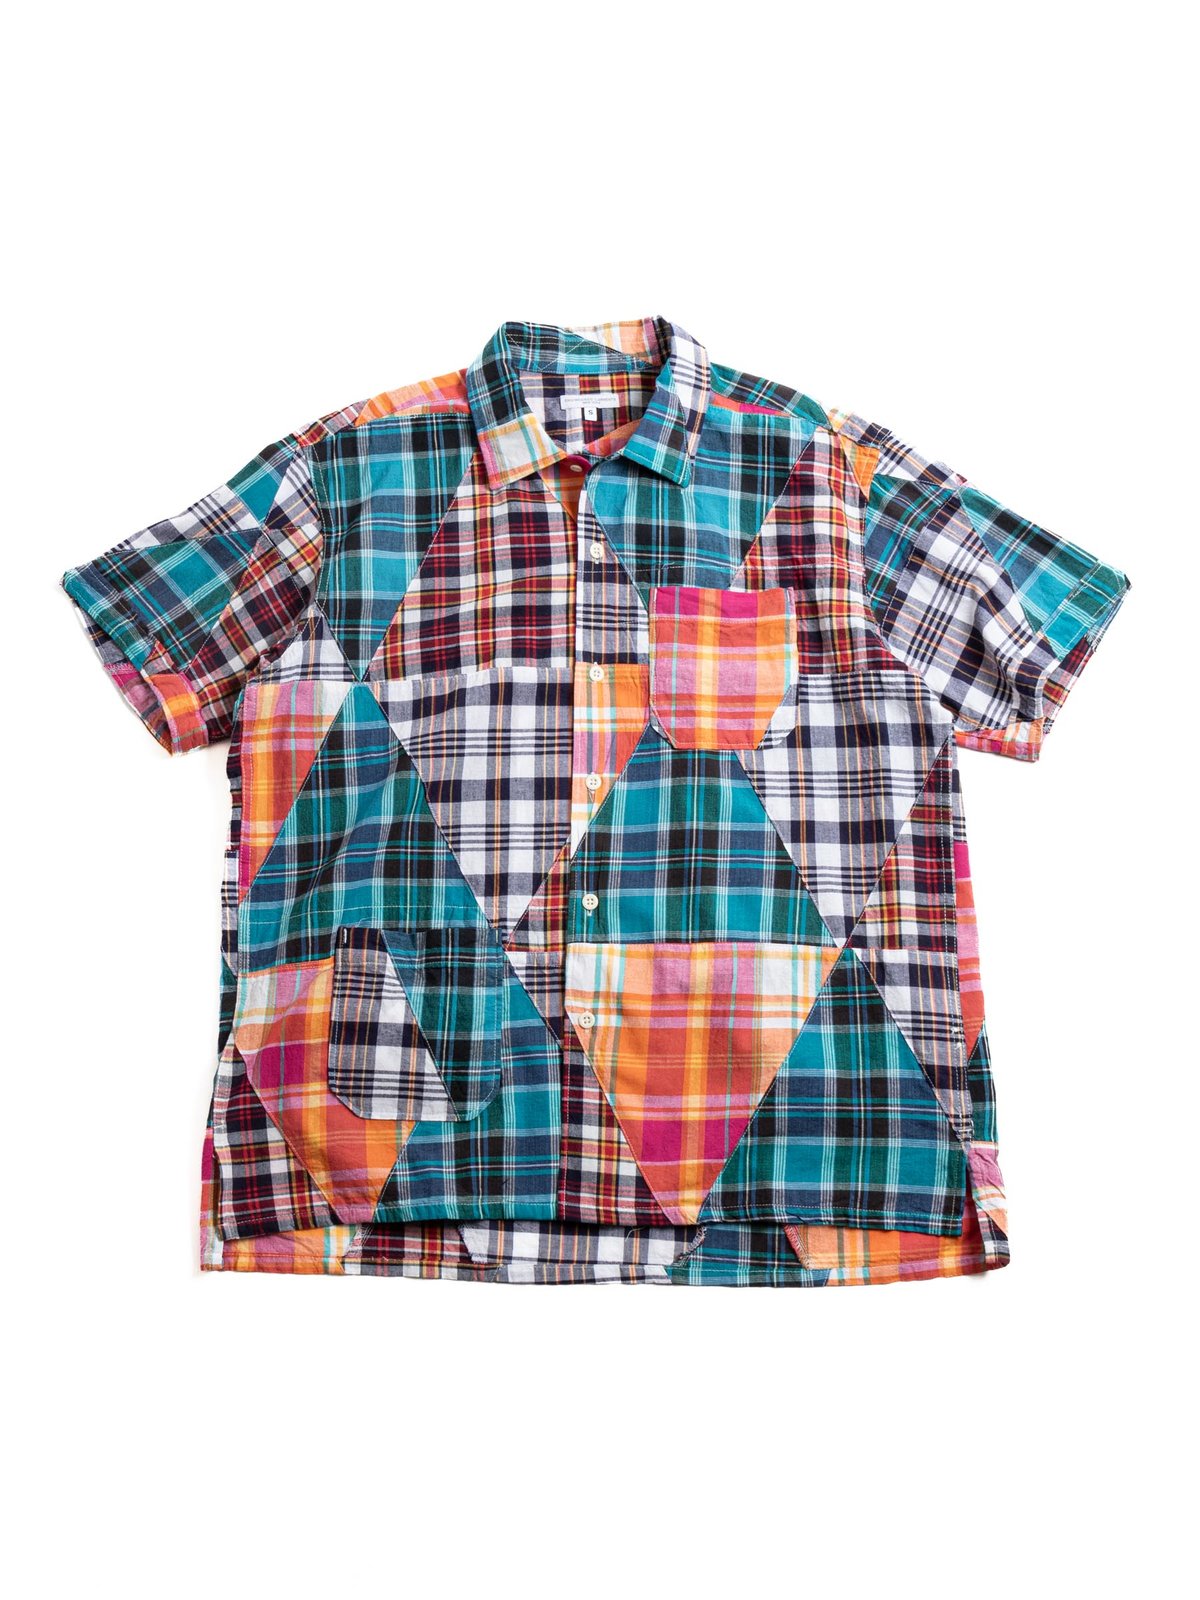 CAMP SHIRT MULTI COLOR TRIANGLE PATCHWORK - Image 1